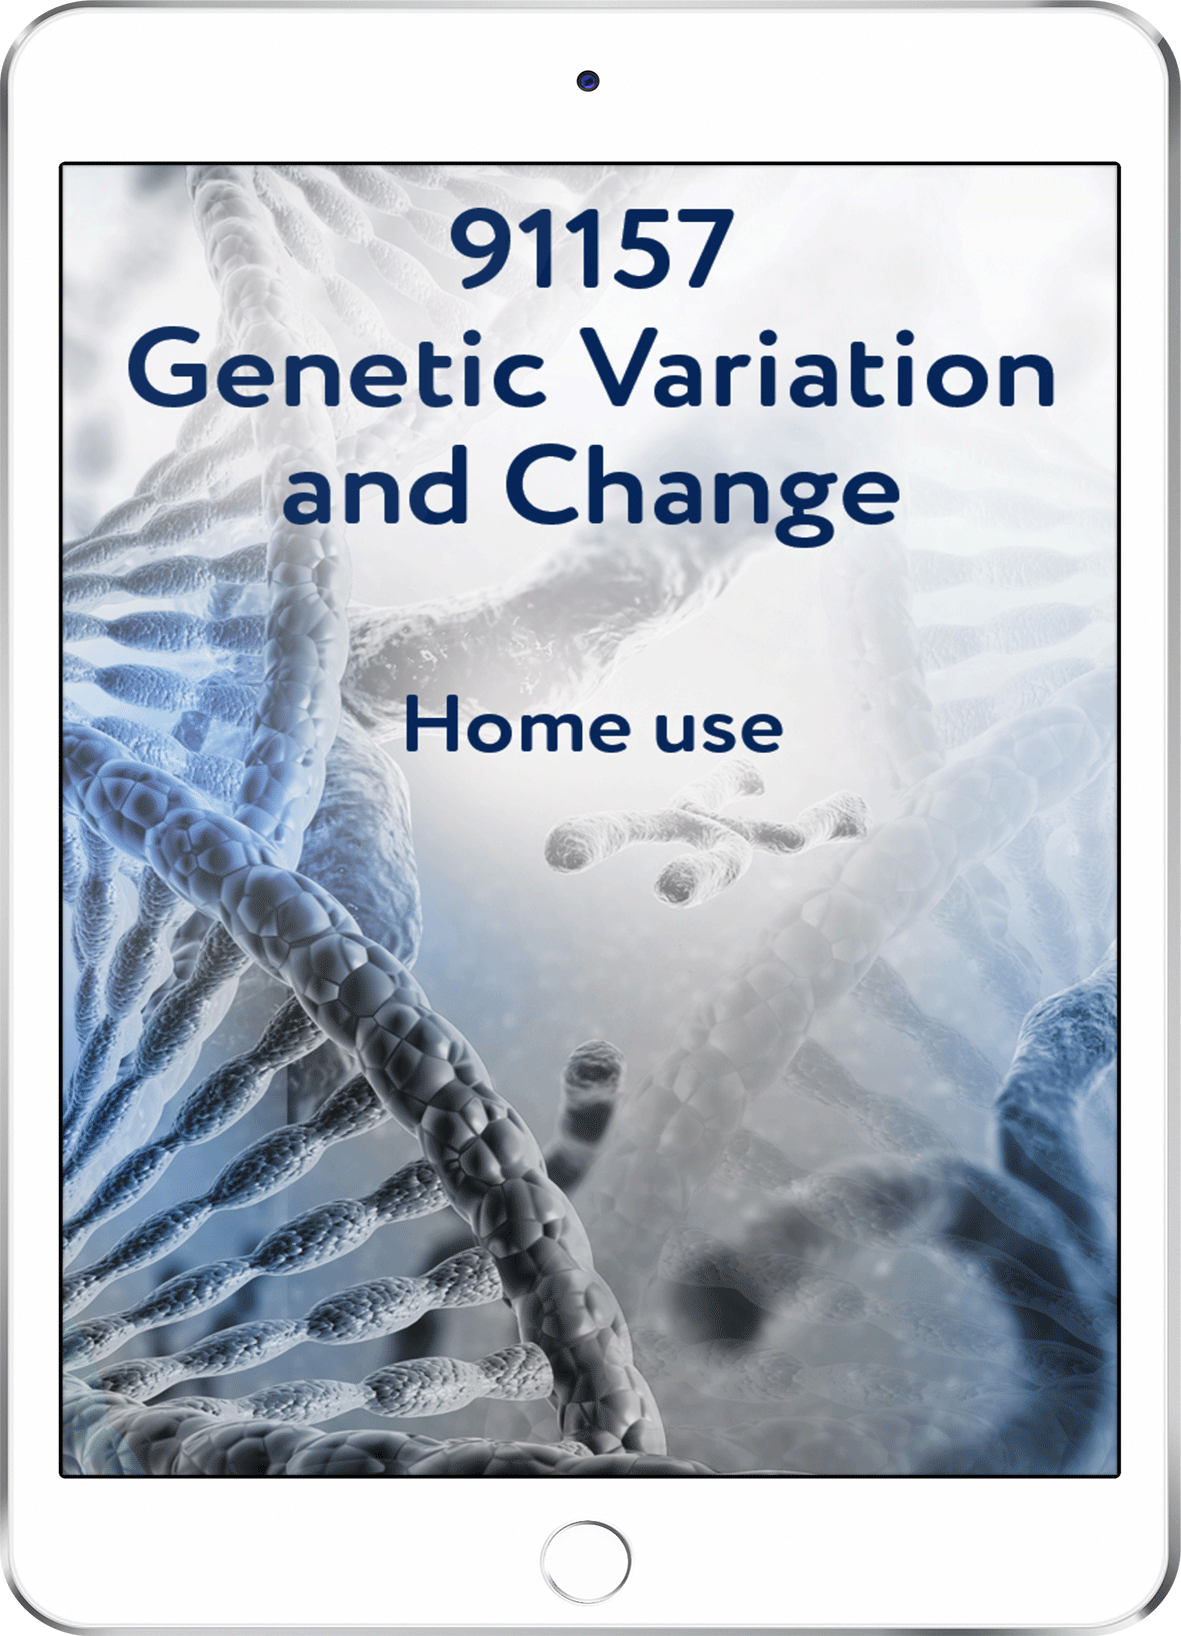 91157 Genetic Variation and Change - Home Use